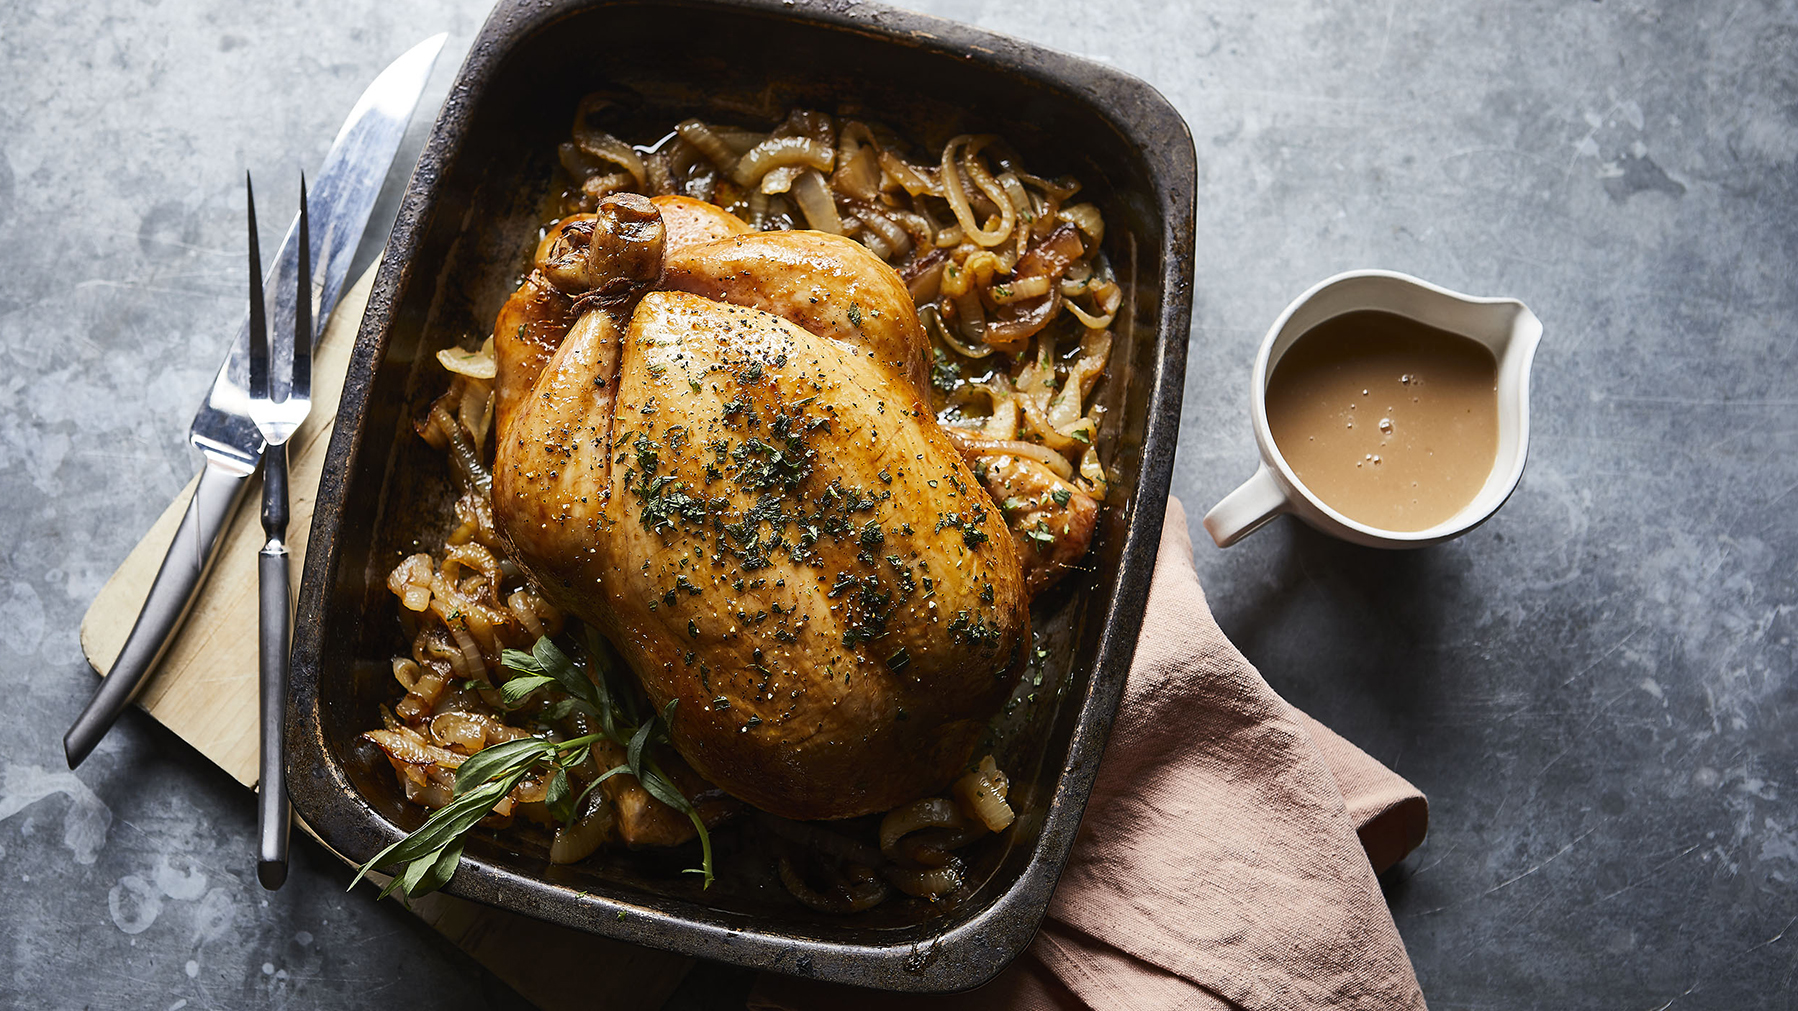 https://food-images.files.bbci.co.uk/food/recipes/roast_chicken_with_57244_16x9.jpg